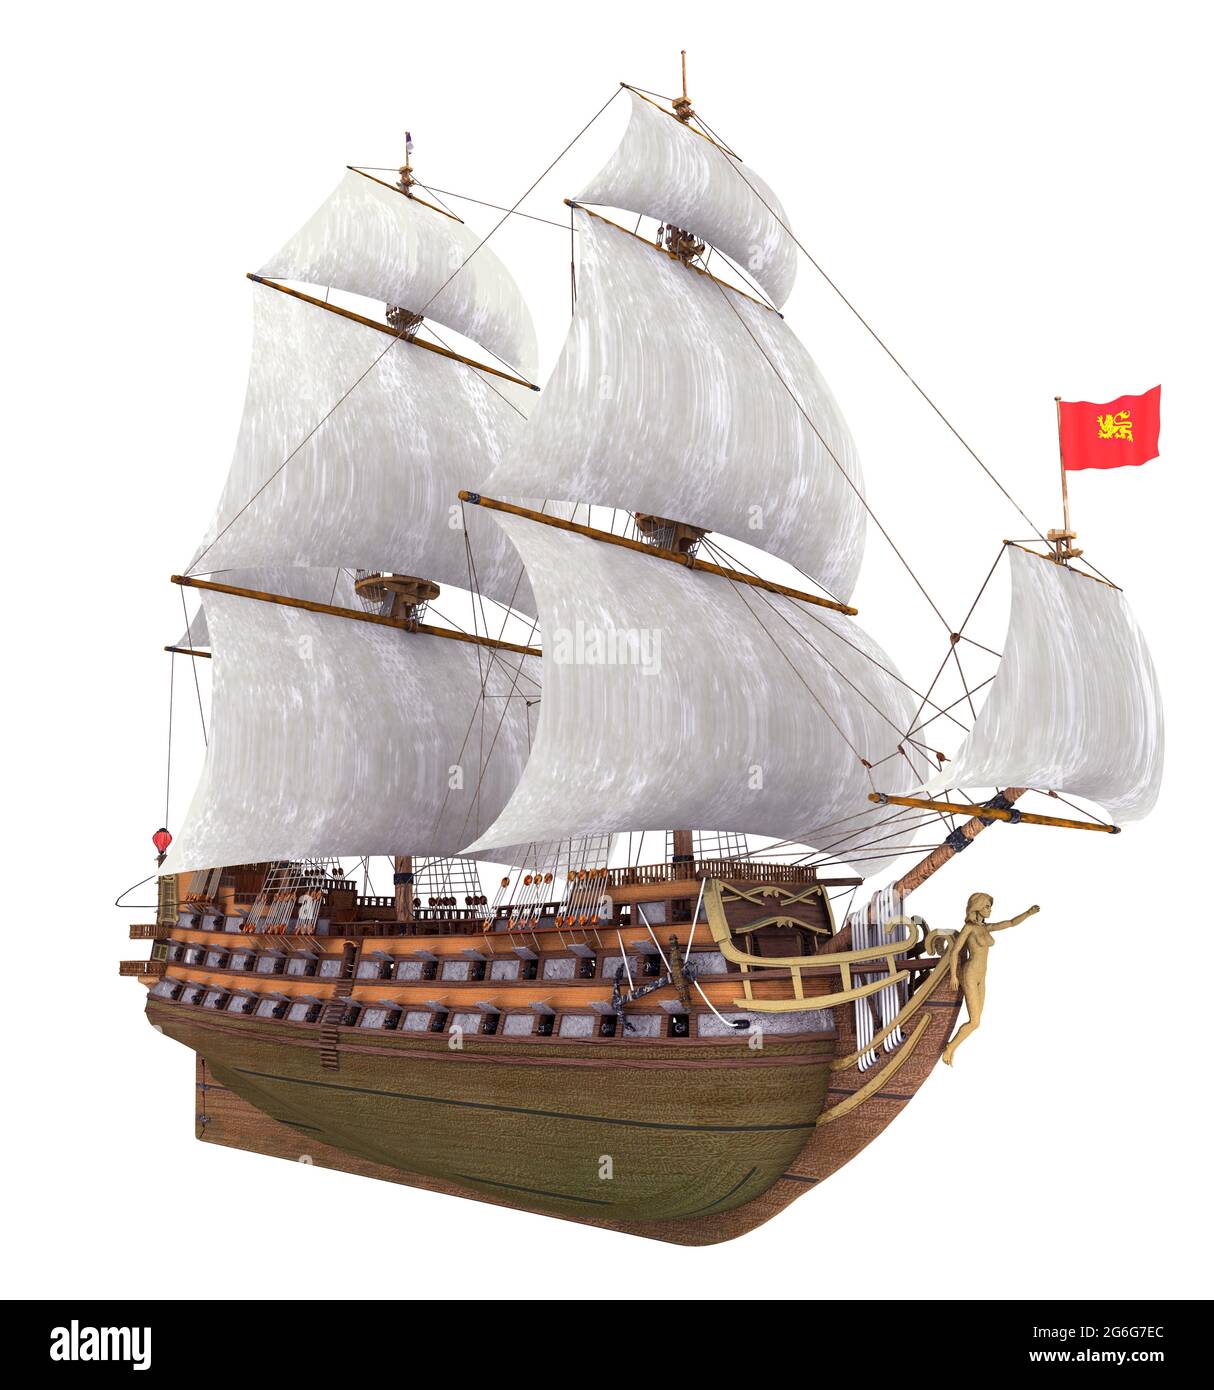 French warship of the 18th century isolated on white background Stock Photo